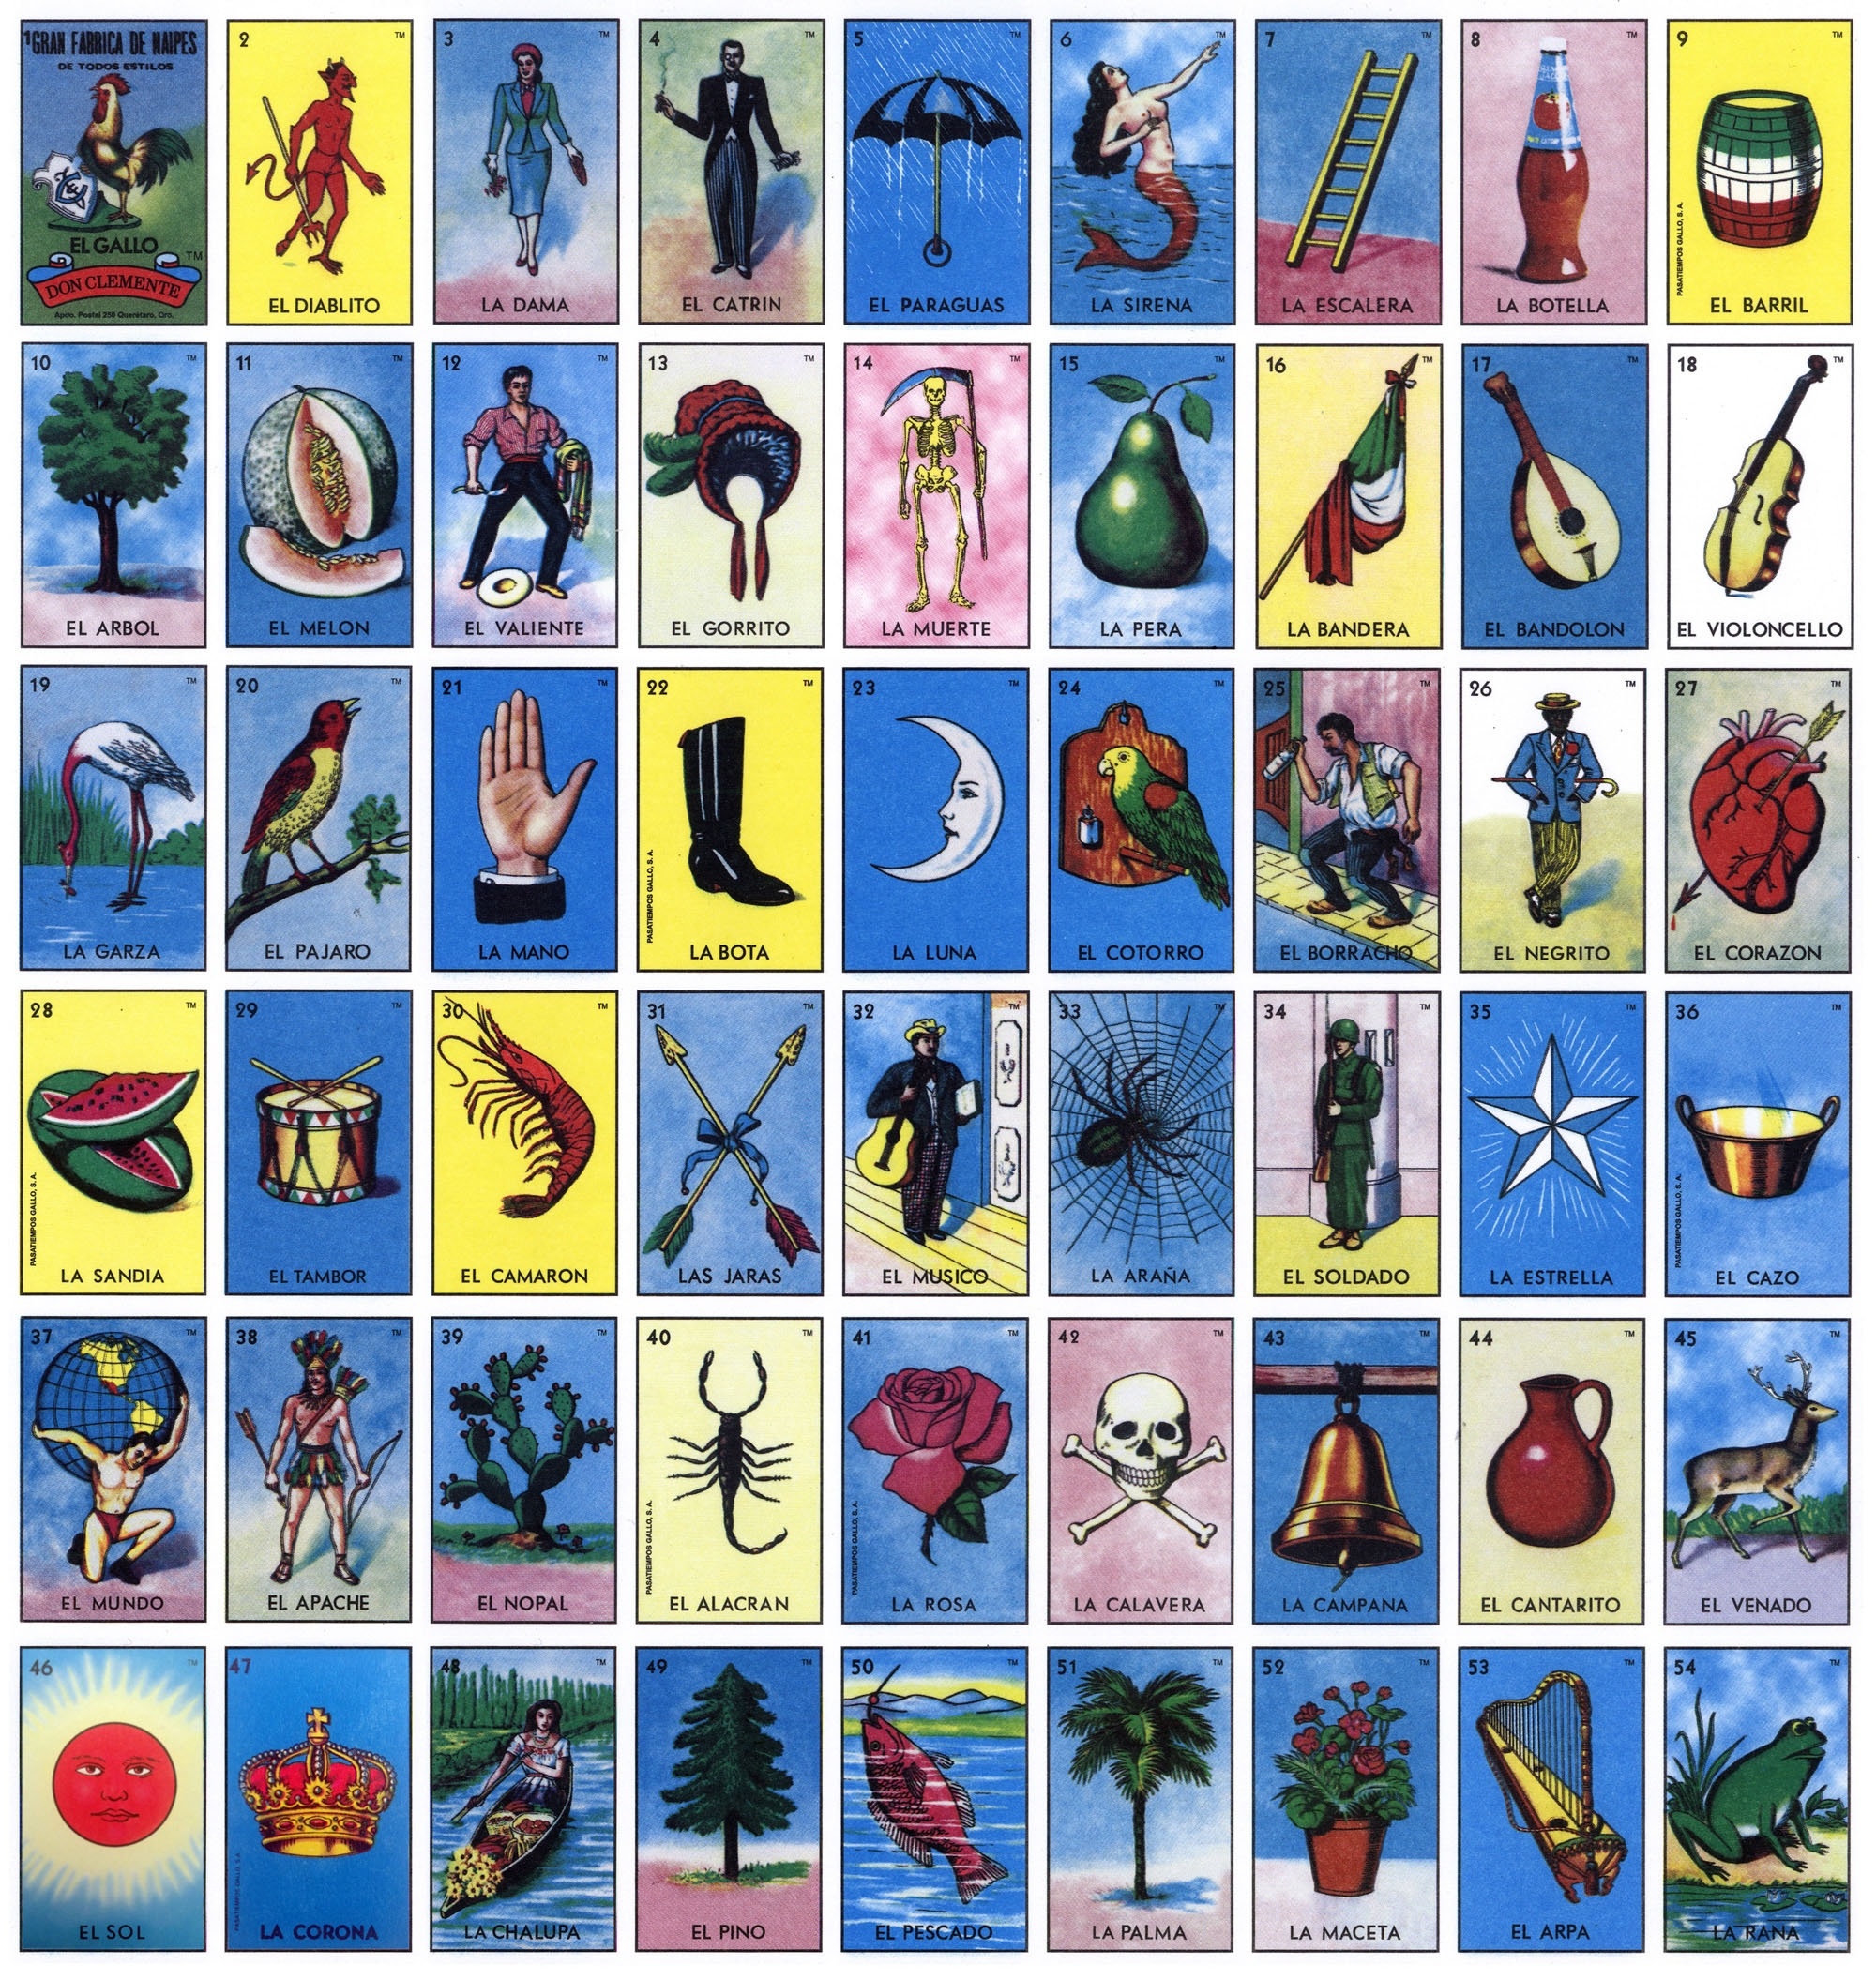 Printable Loteria Cards (89+ Images In Collection) Page 1 - Free Printable Loteria Cards